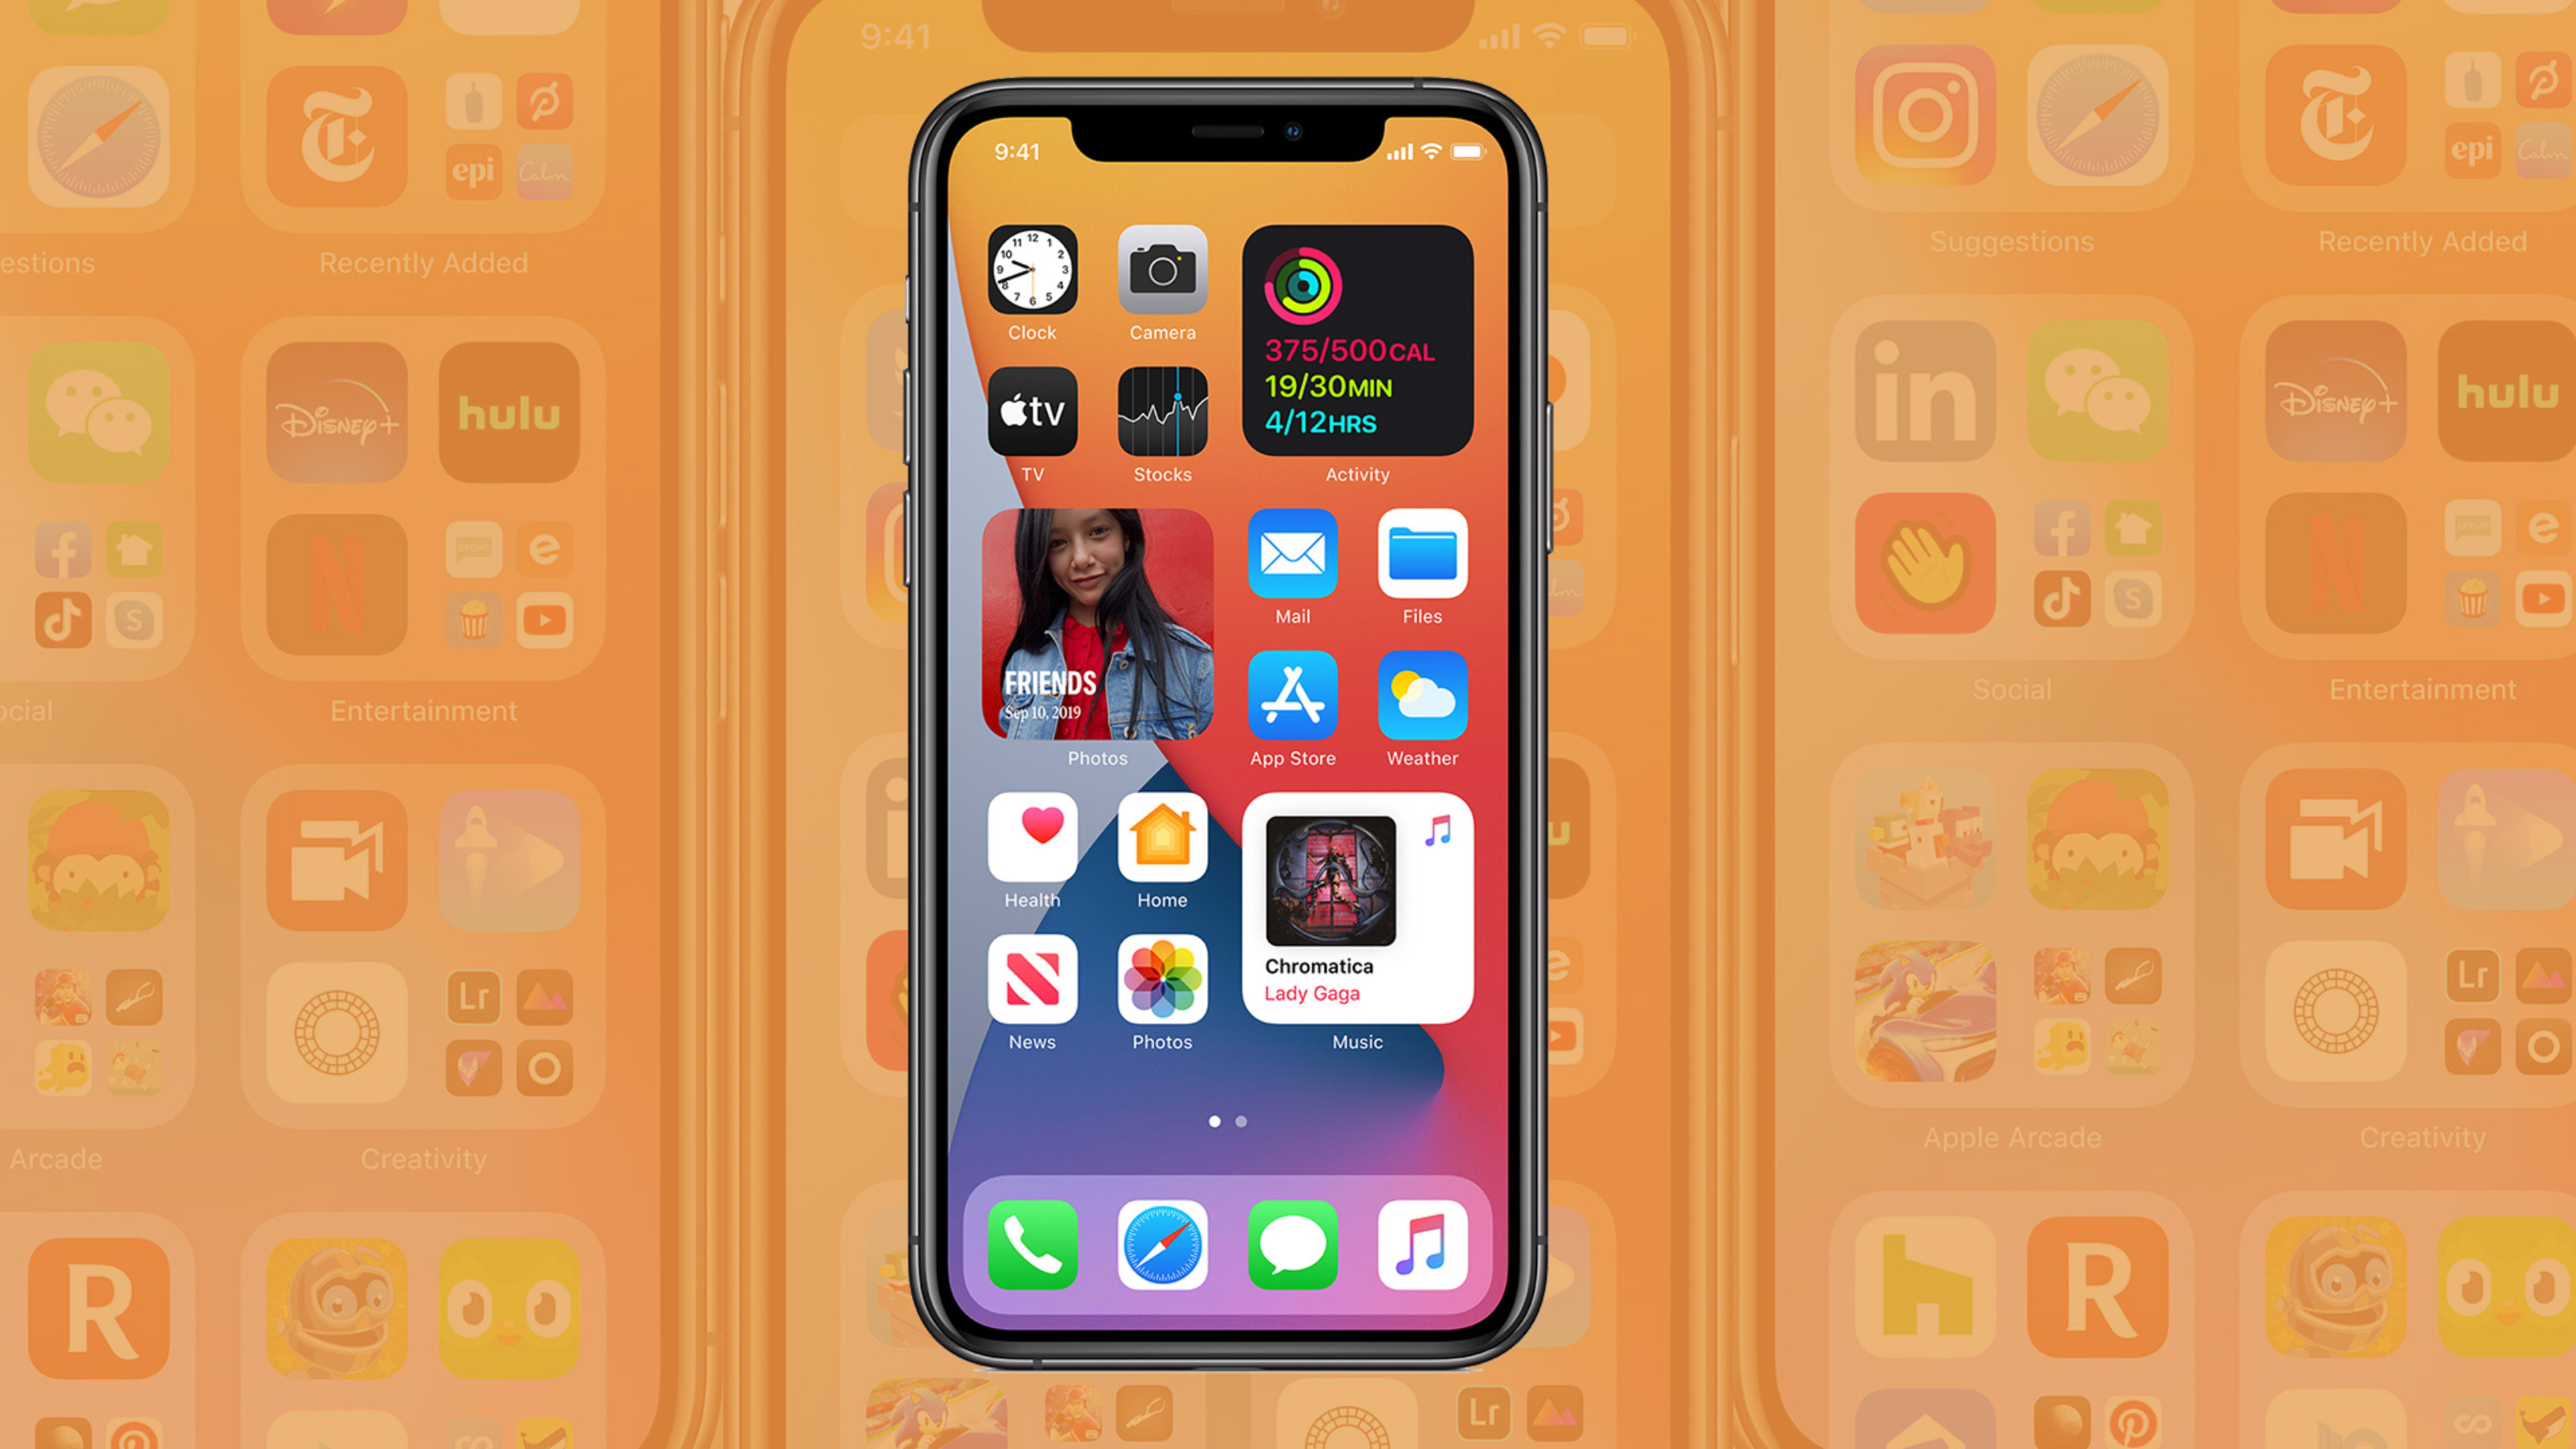 In iOS 14, Apple finally addresses a nagging problem: Too many apps